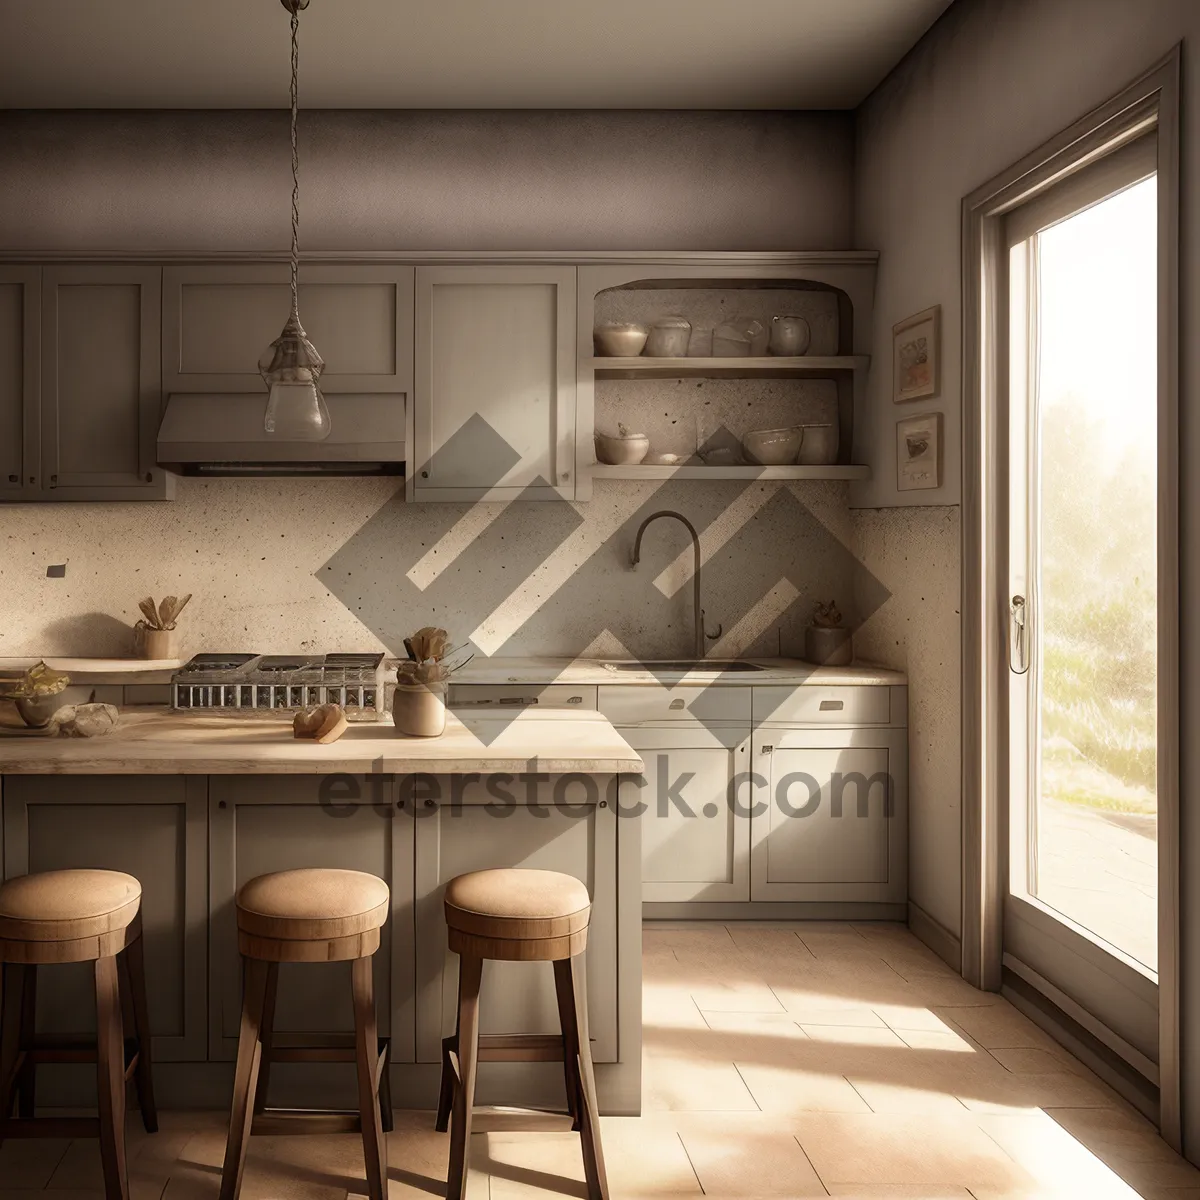 Picture of Elegantly Designed Kitchen Interior Featuring Stylish Furniture